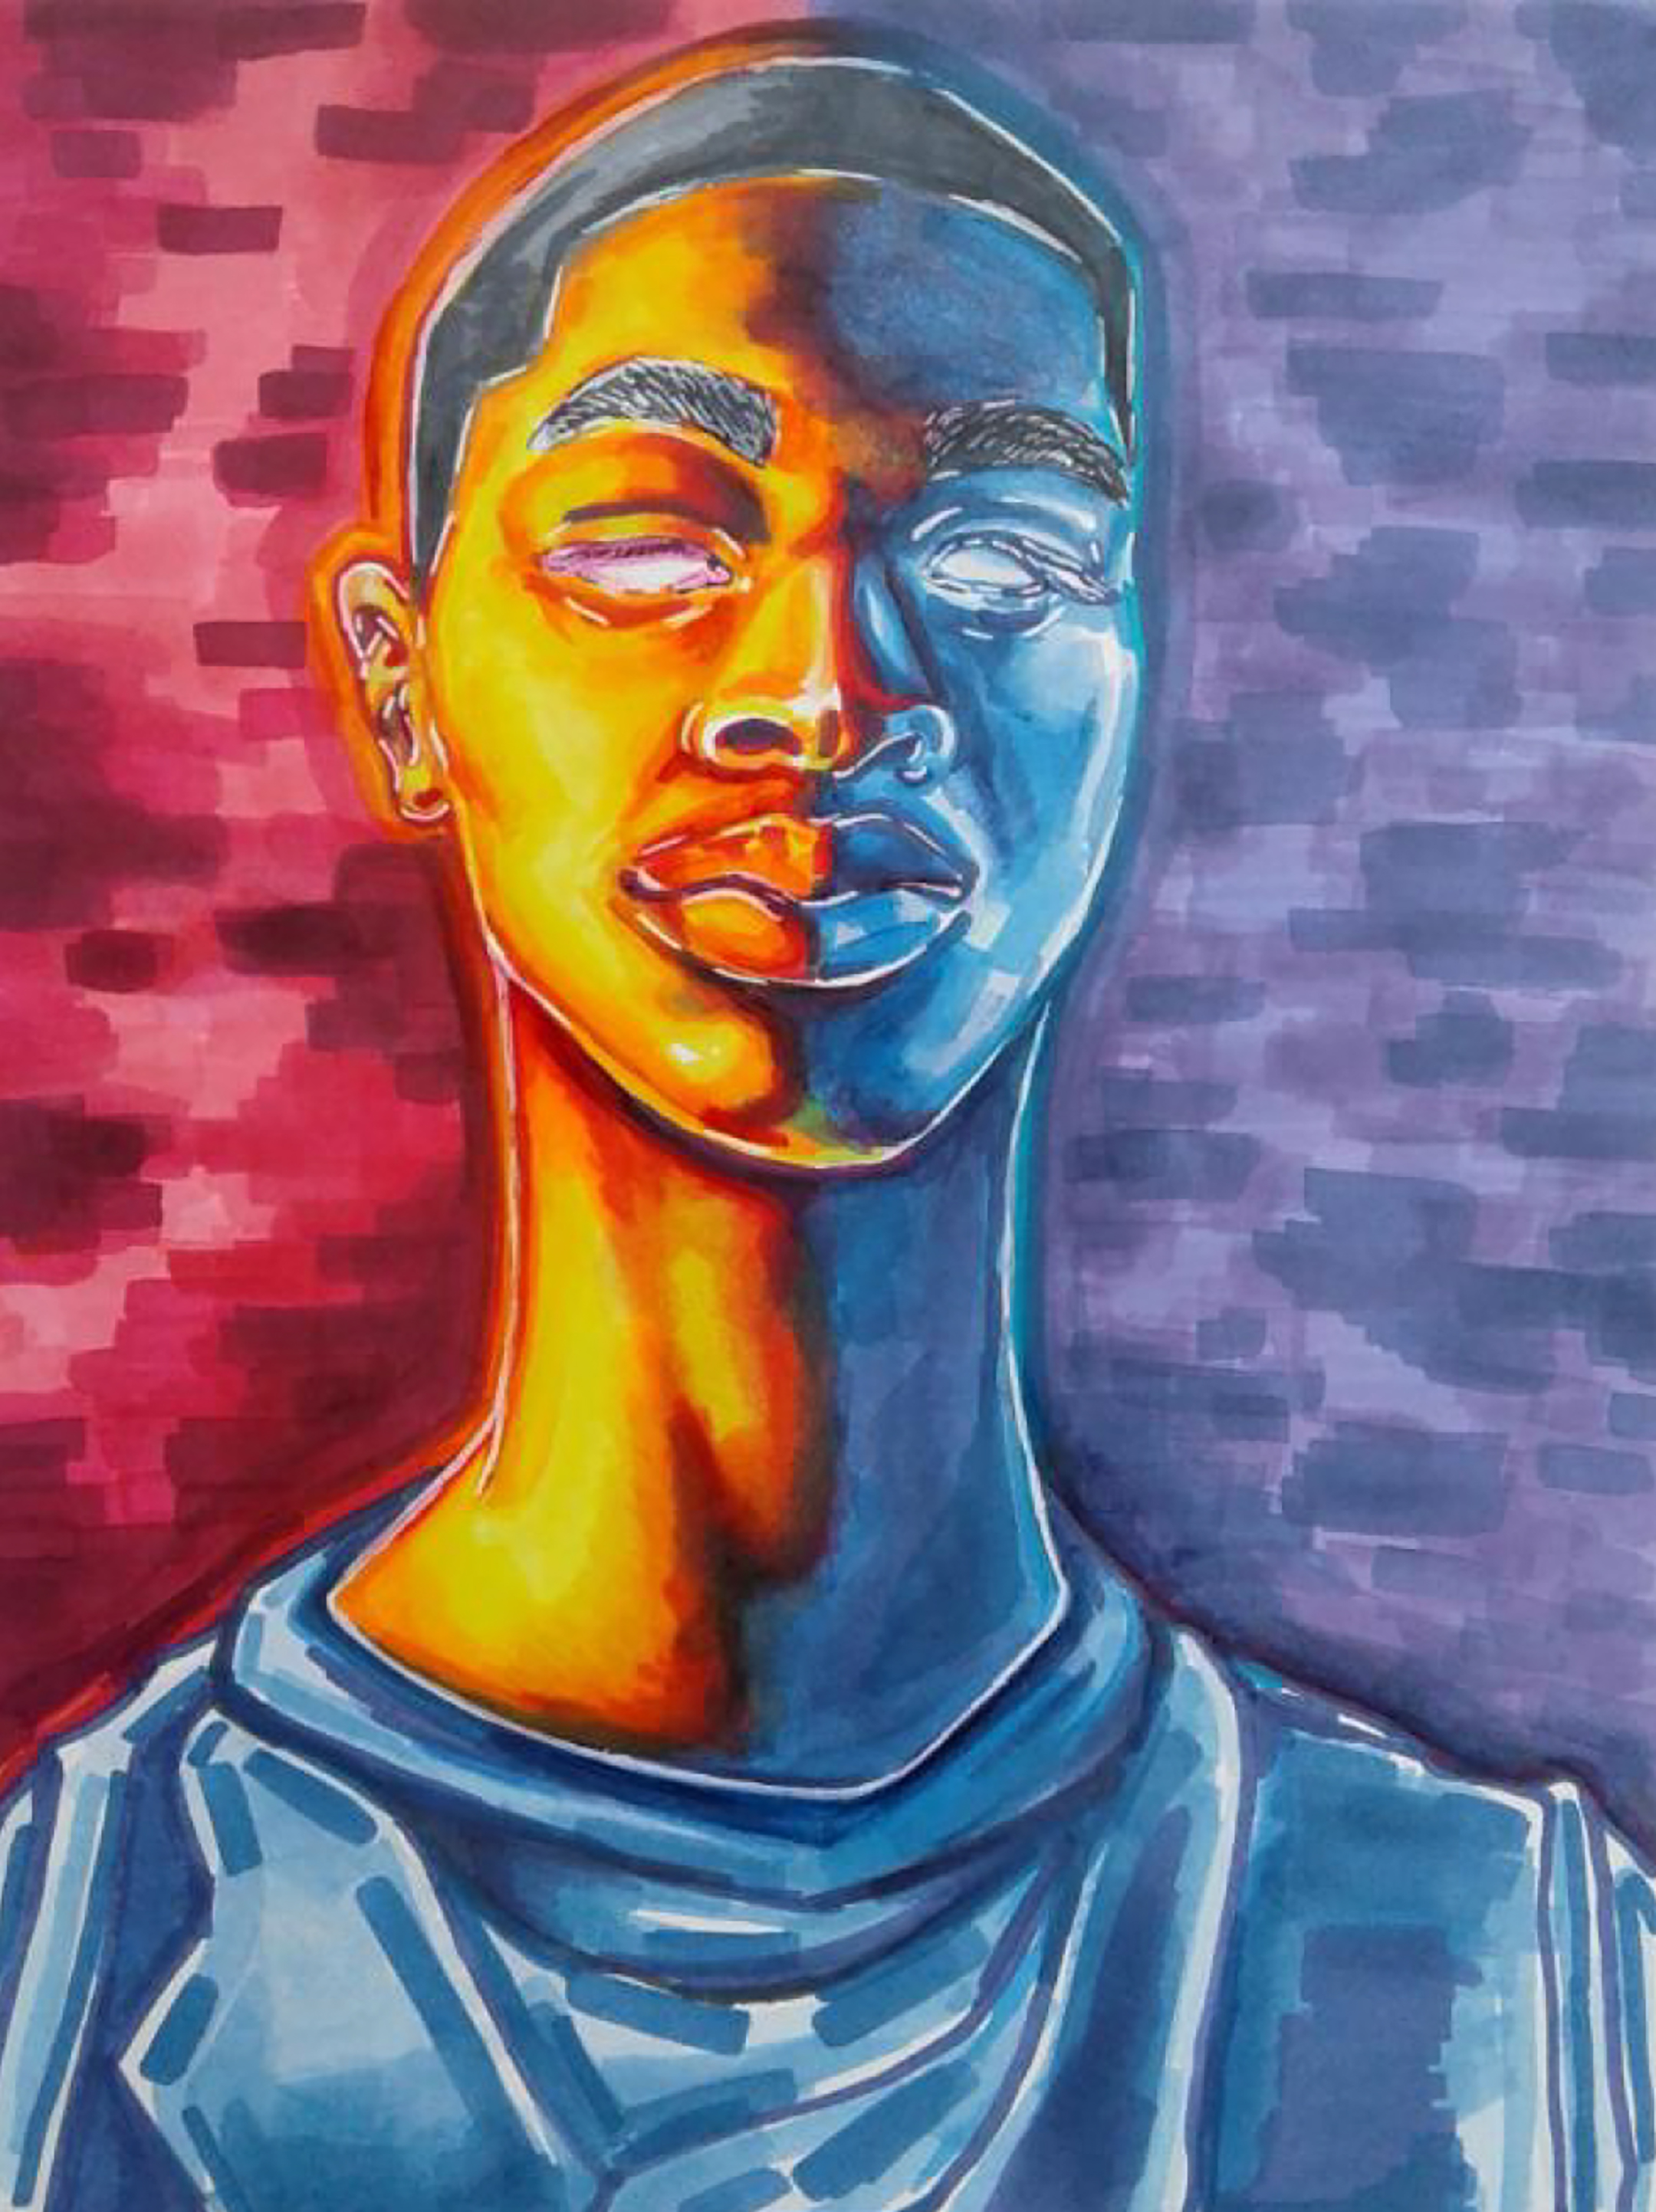 portrait of a young black man in orange and blue with close-cropped hair, white eyes, and a baggy shirt against a red and purple wall